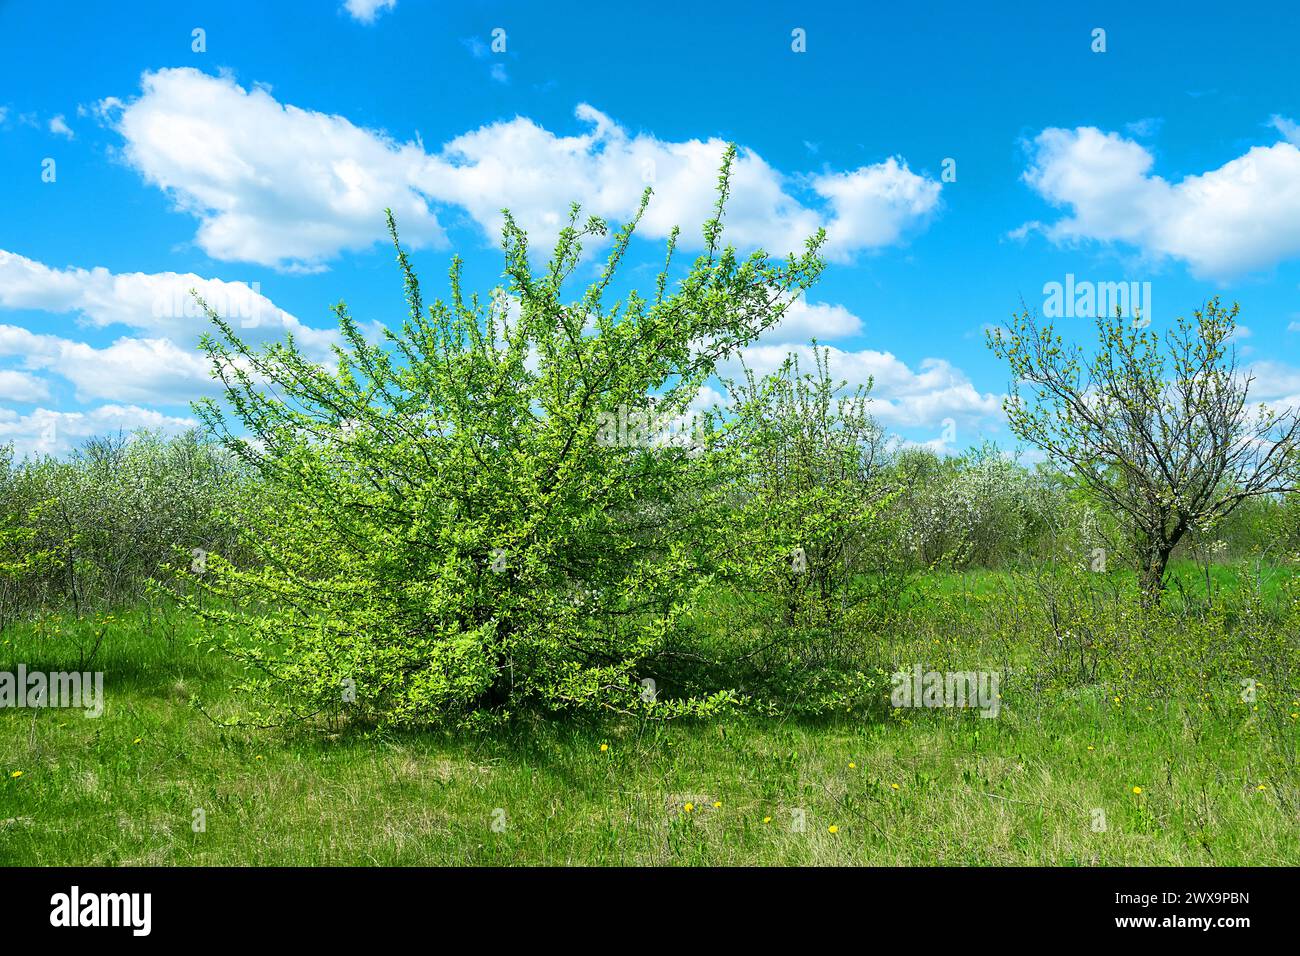 European wild apple (Malus sylvestris). Plot of forest-steppe, blooming wild fruit trees. Type of biocenosis close to natural, primal steppe. Rostov r Stock Photo